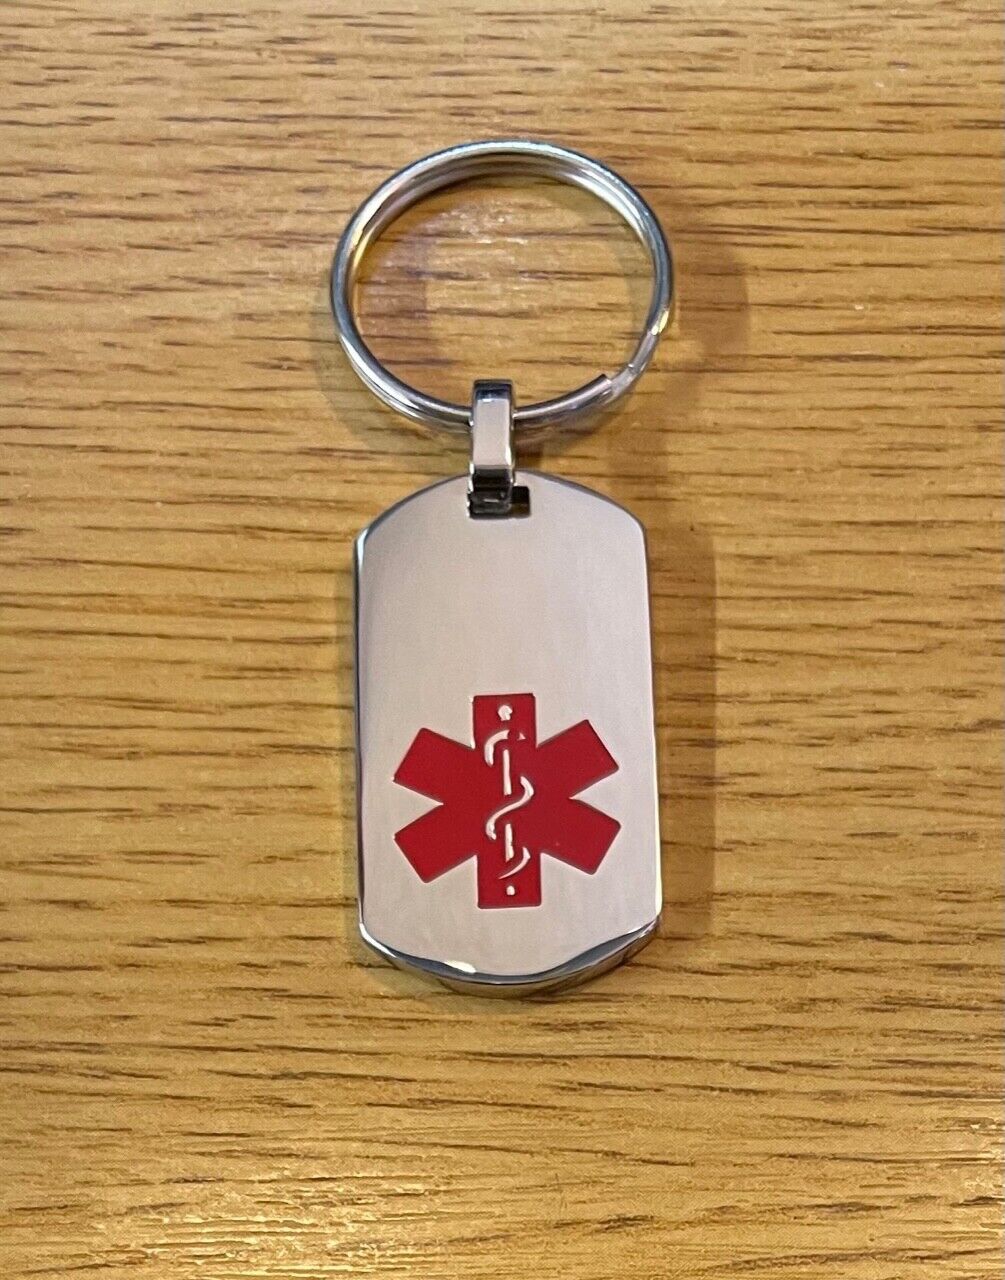 Medical Alert ID Keychain  - FREE ENGRAVING / WALLET CARD & SHIPPING-USA